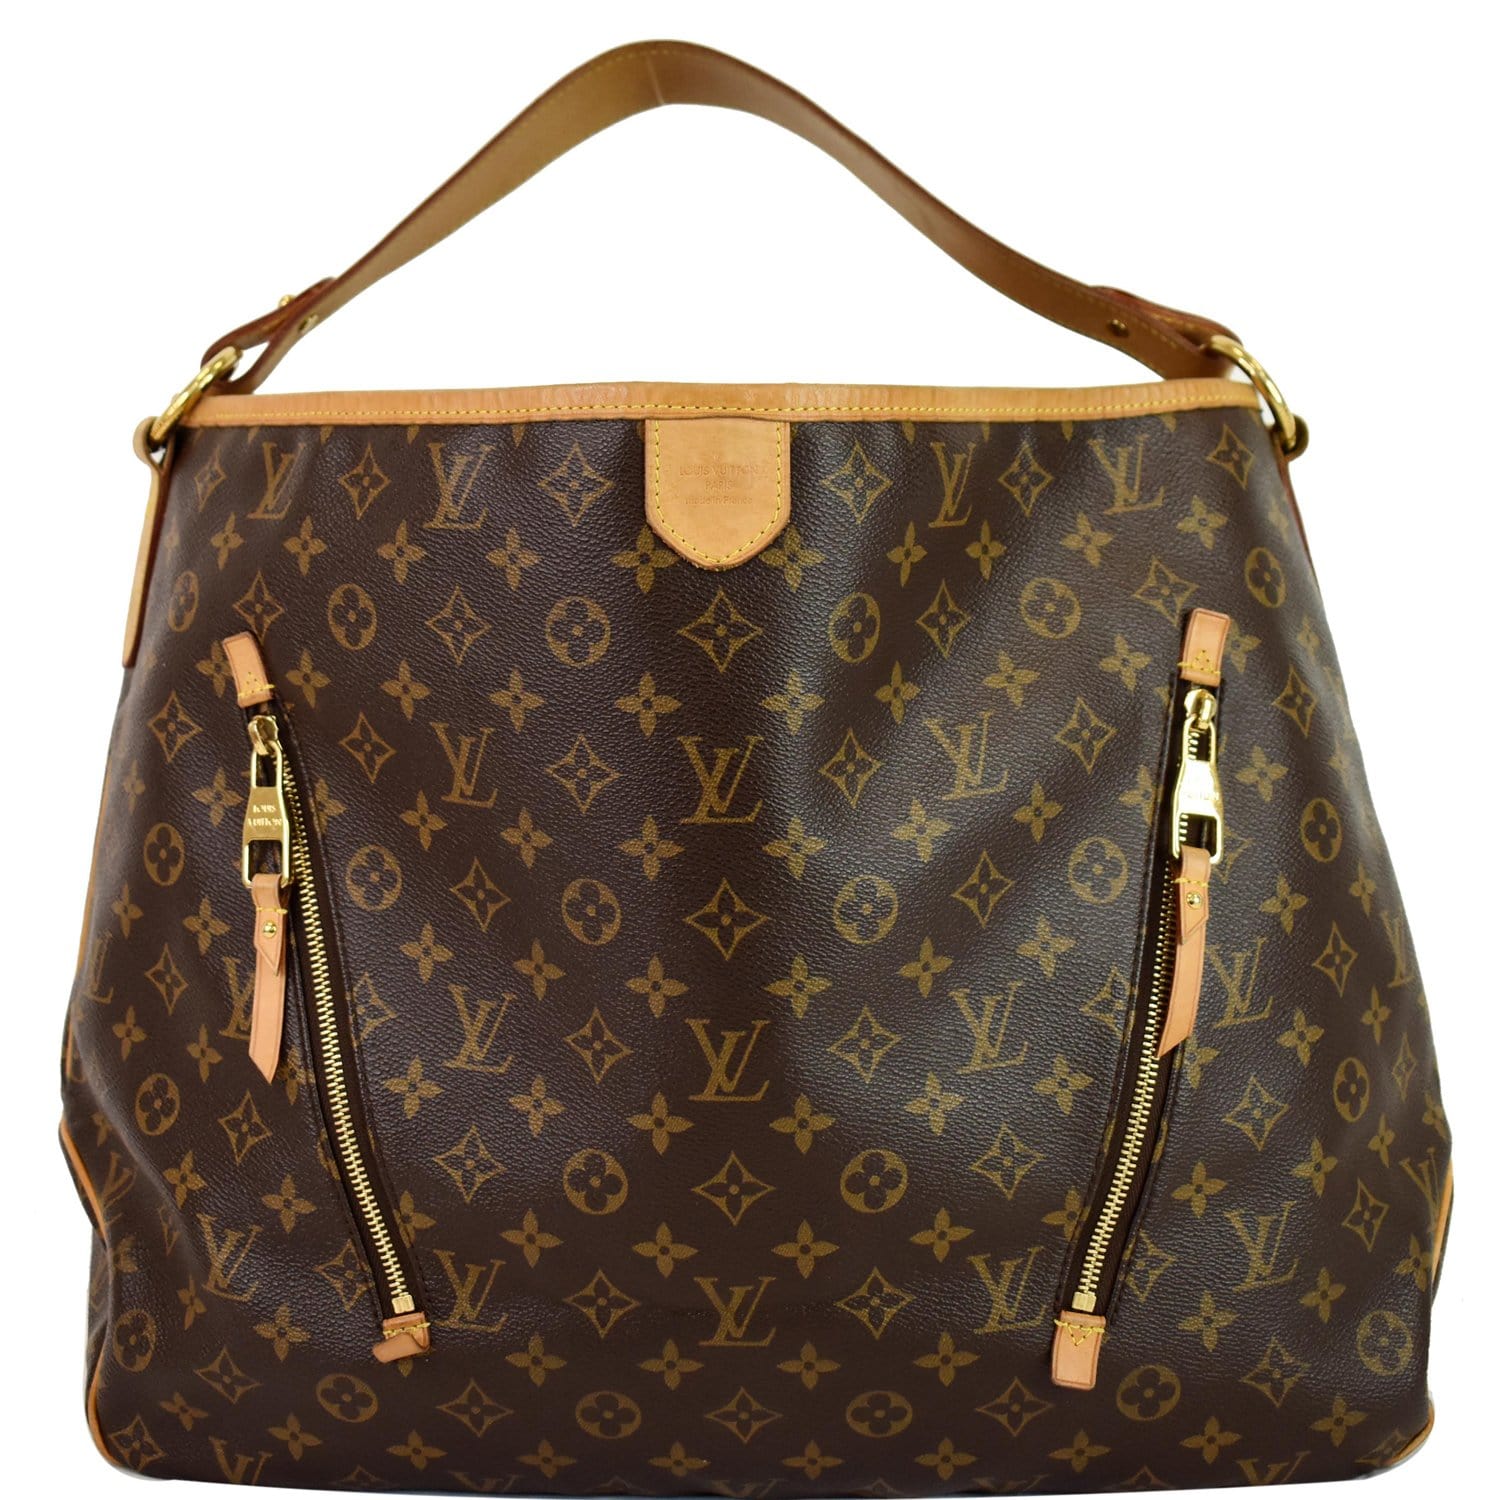 Authentic Louis Vuitton delightful Mm with strap